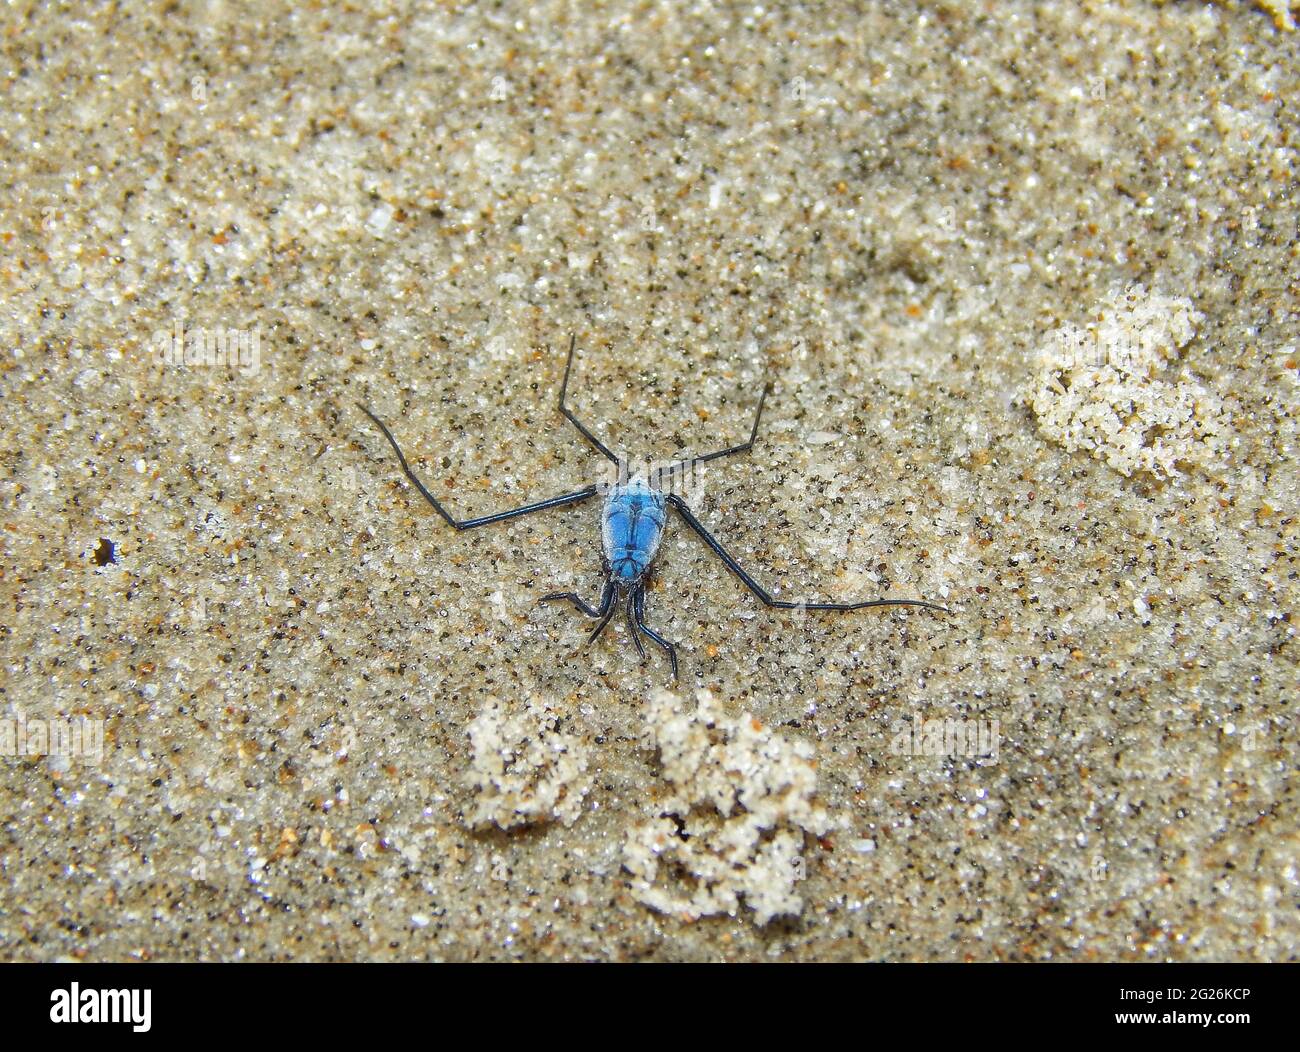 Blue, insect looking creature on the Manzanilla Beach in Trinidad. Stock Photo